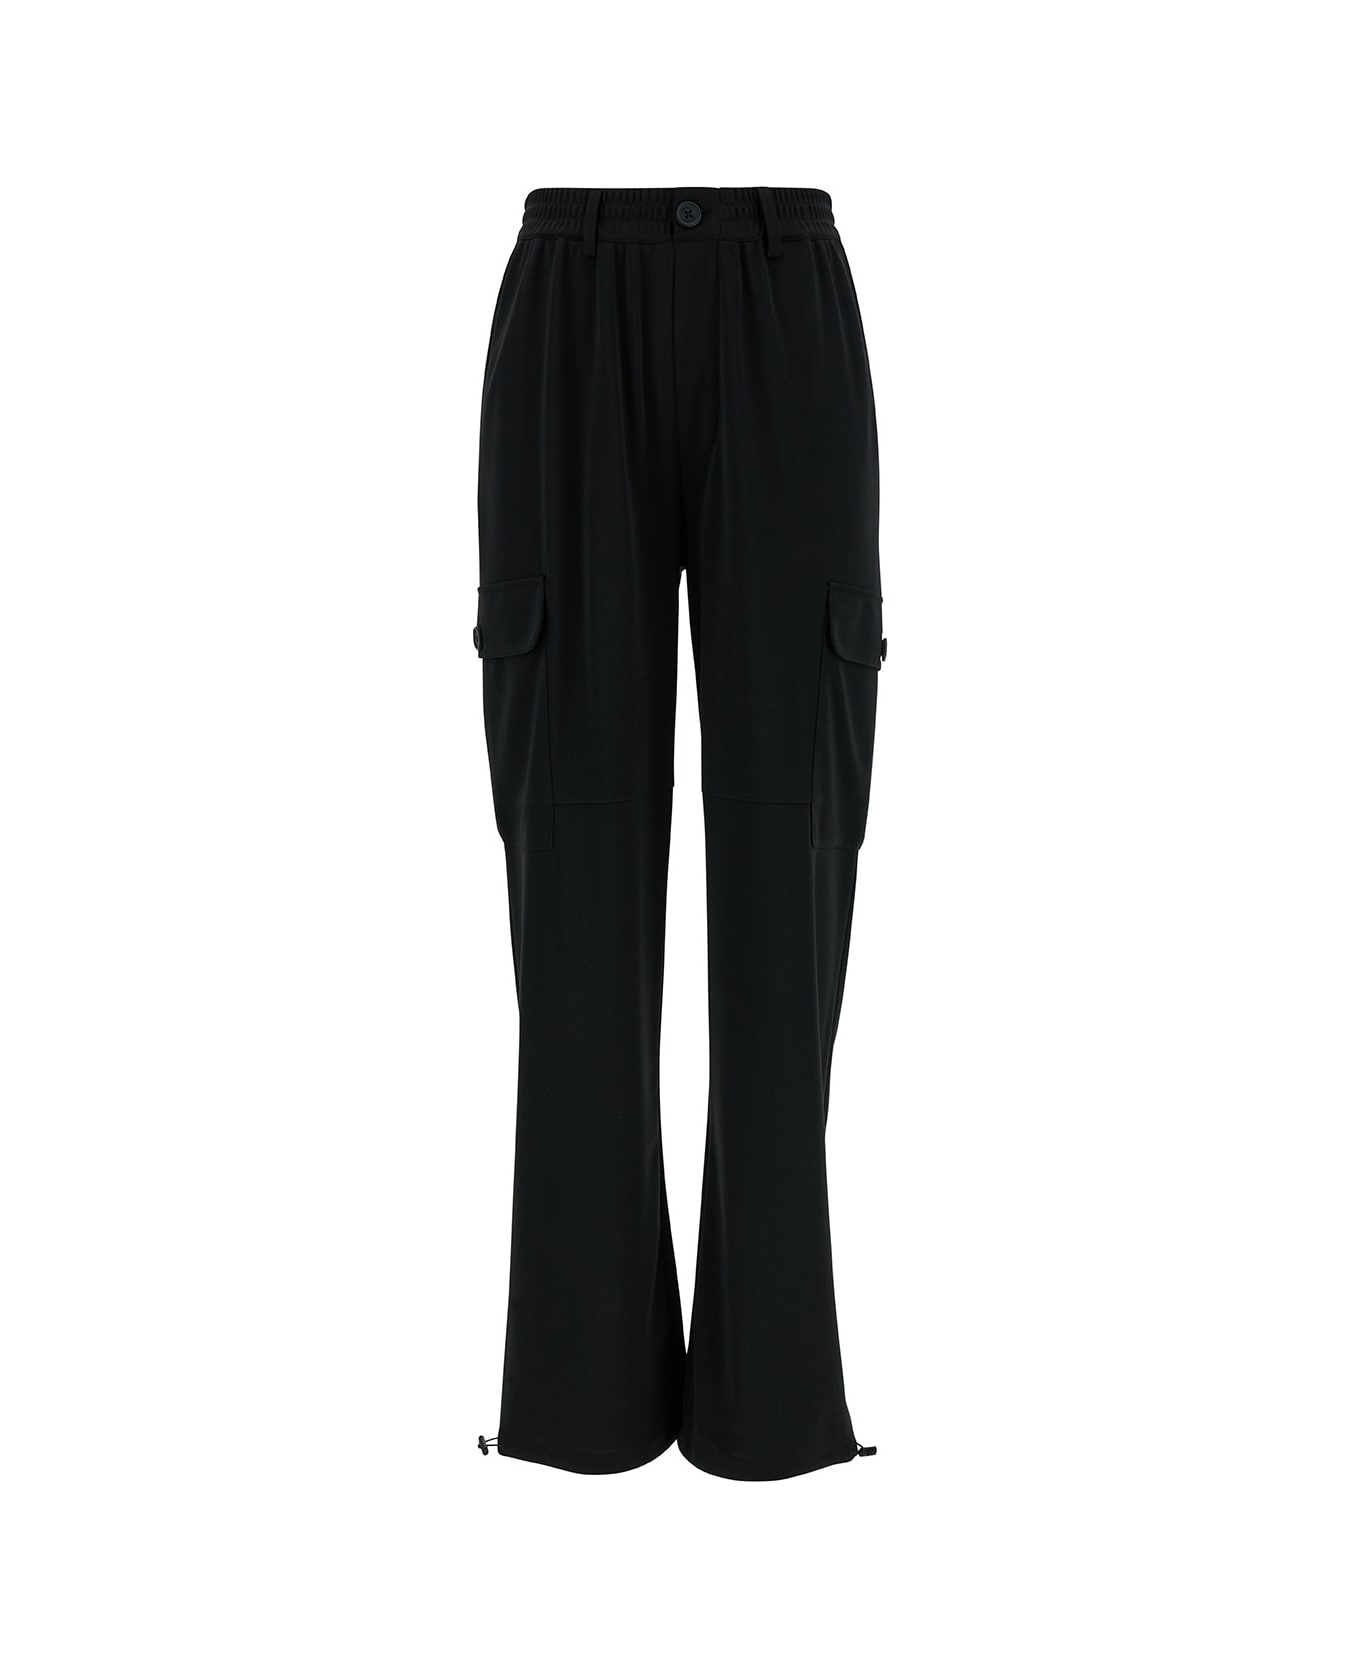 TwinSet Black Cargo Pants With Oval T Patch In Tech Fabric Woman TwinSet - BLACK